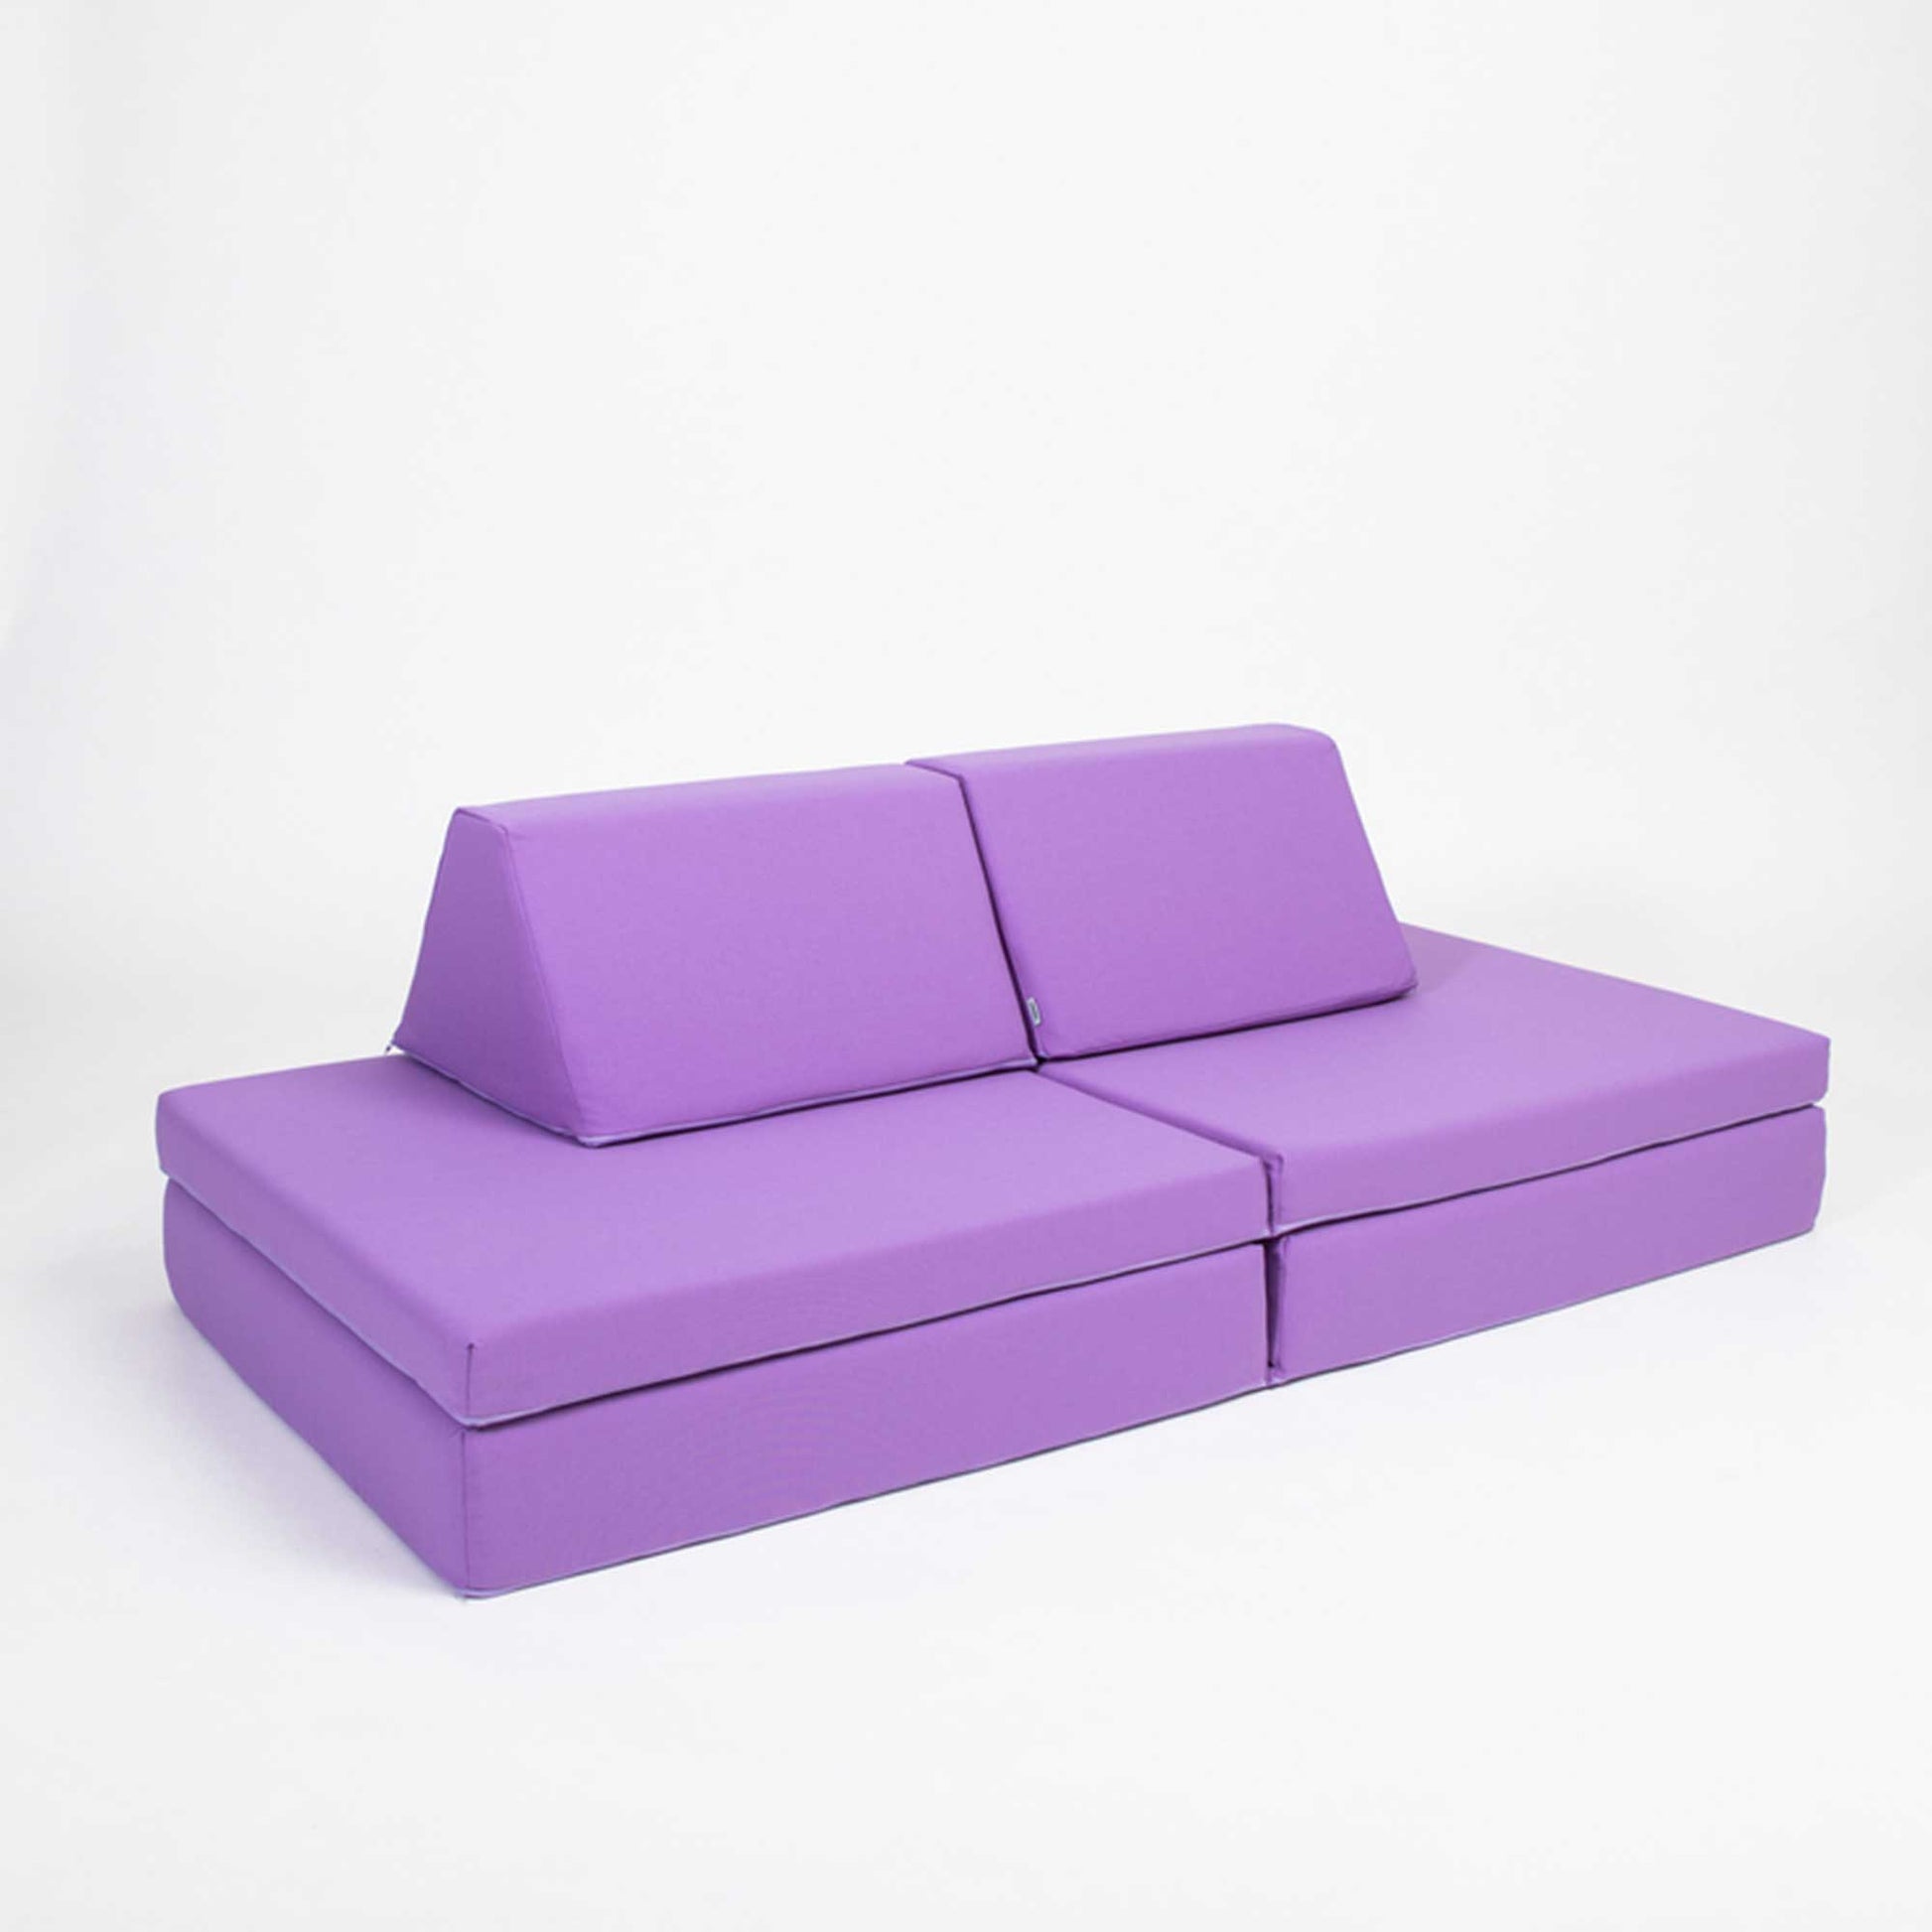 Purple Monboxy play sofa arranged like a couch